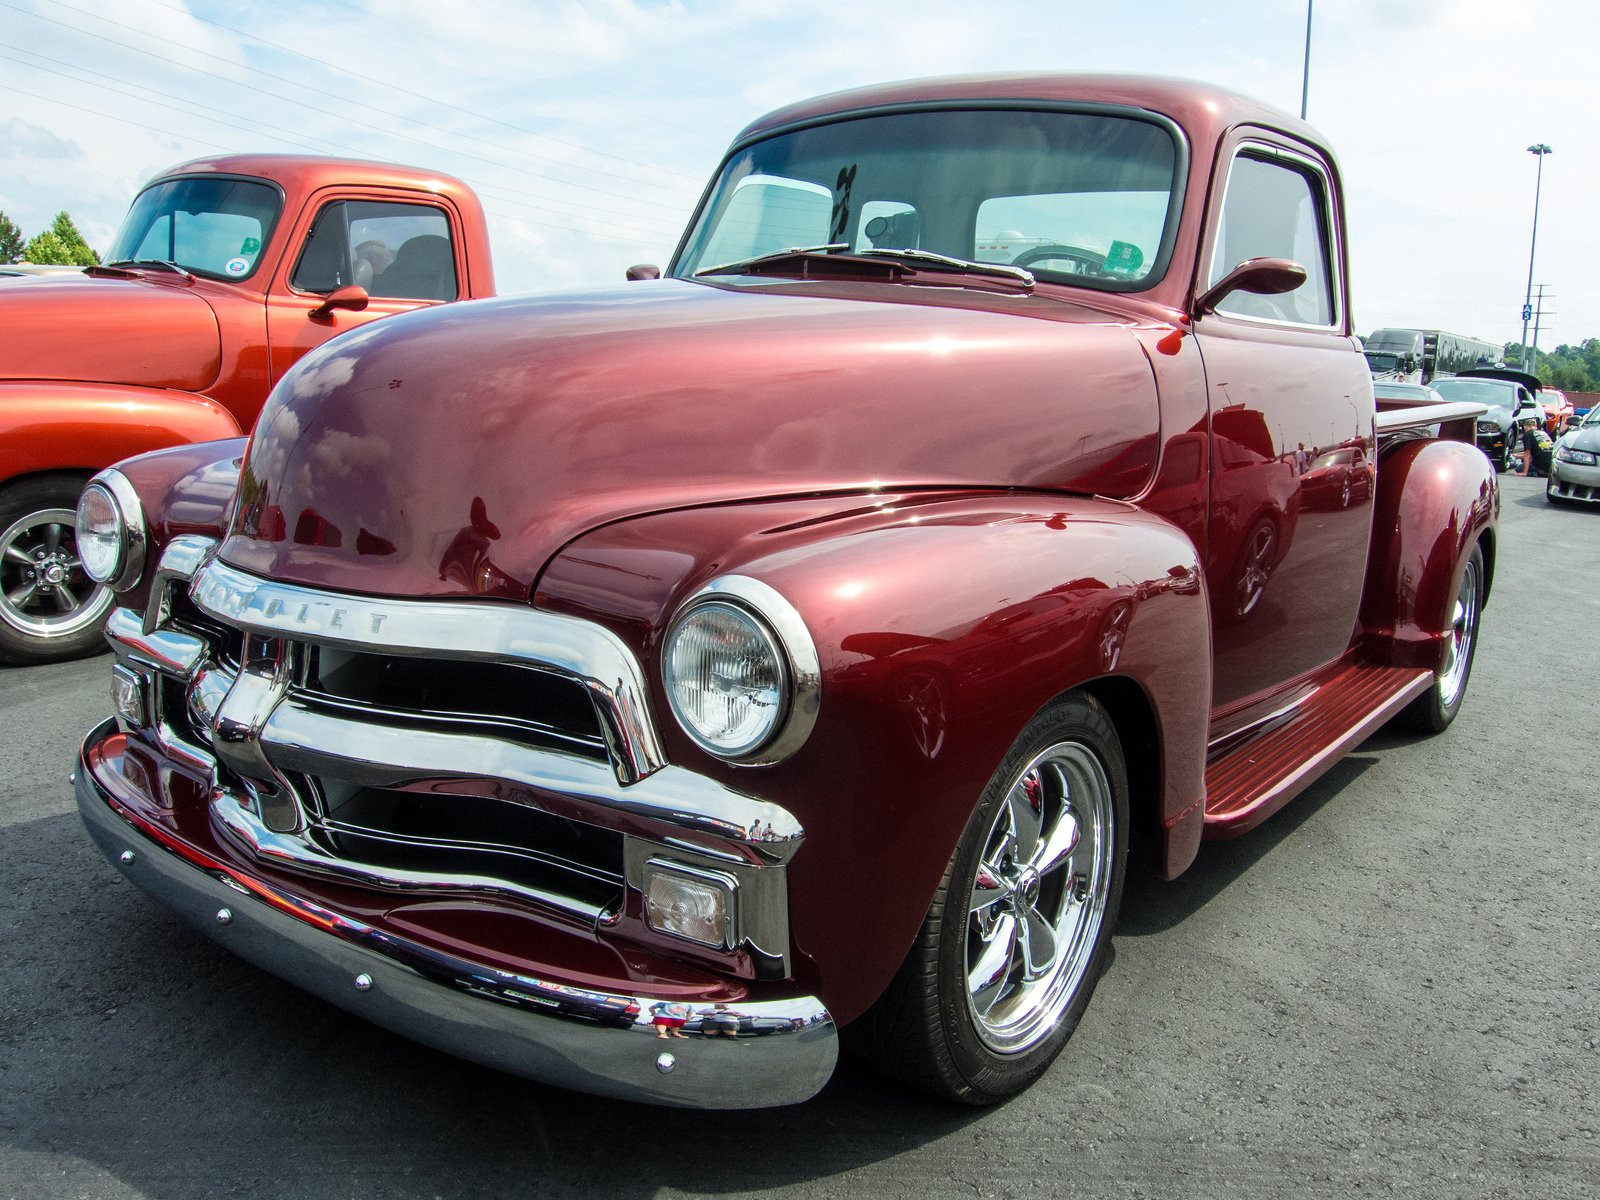 Old Chevy Truck Wallpaper - Antique Car , HD Wallpaper & Backgrounds